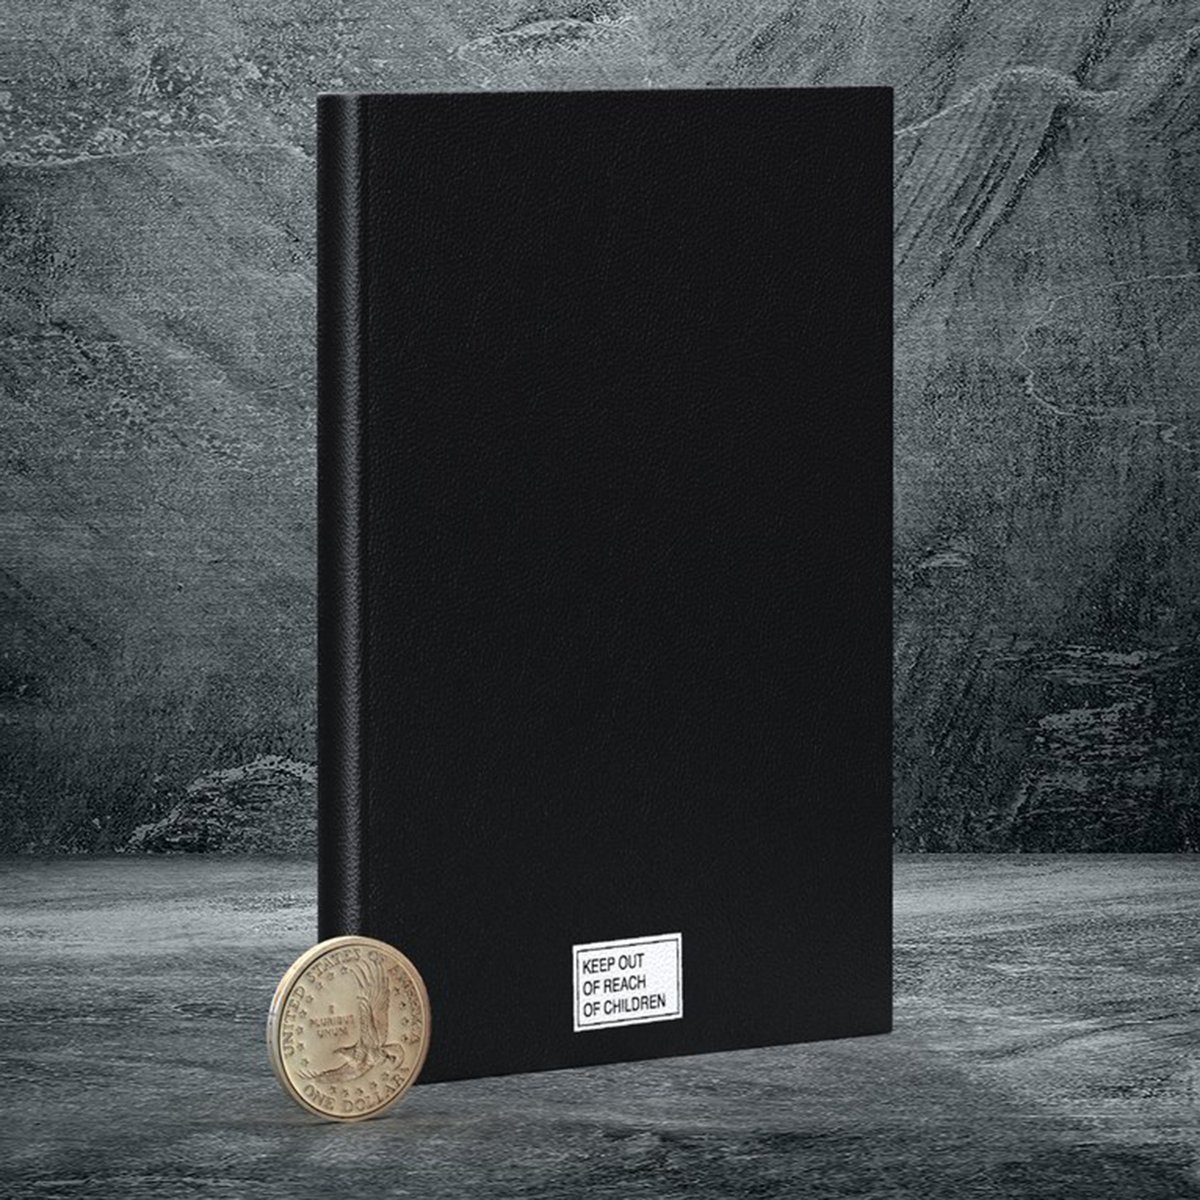 Image of The Sketchbooks of Nick Blinko - Single Hardcover Book handwrapped edition